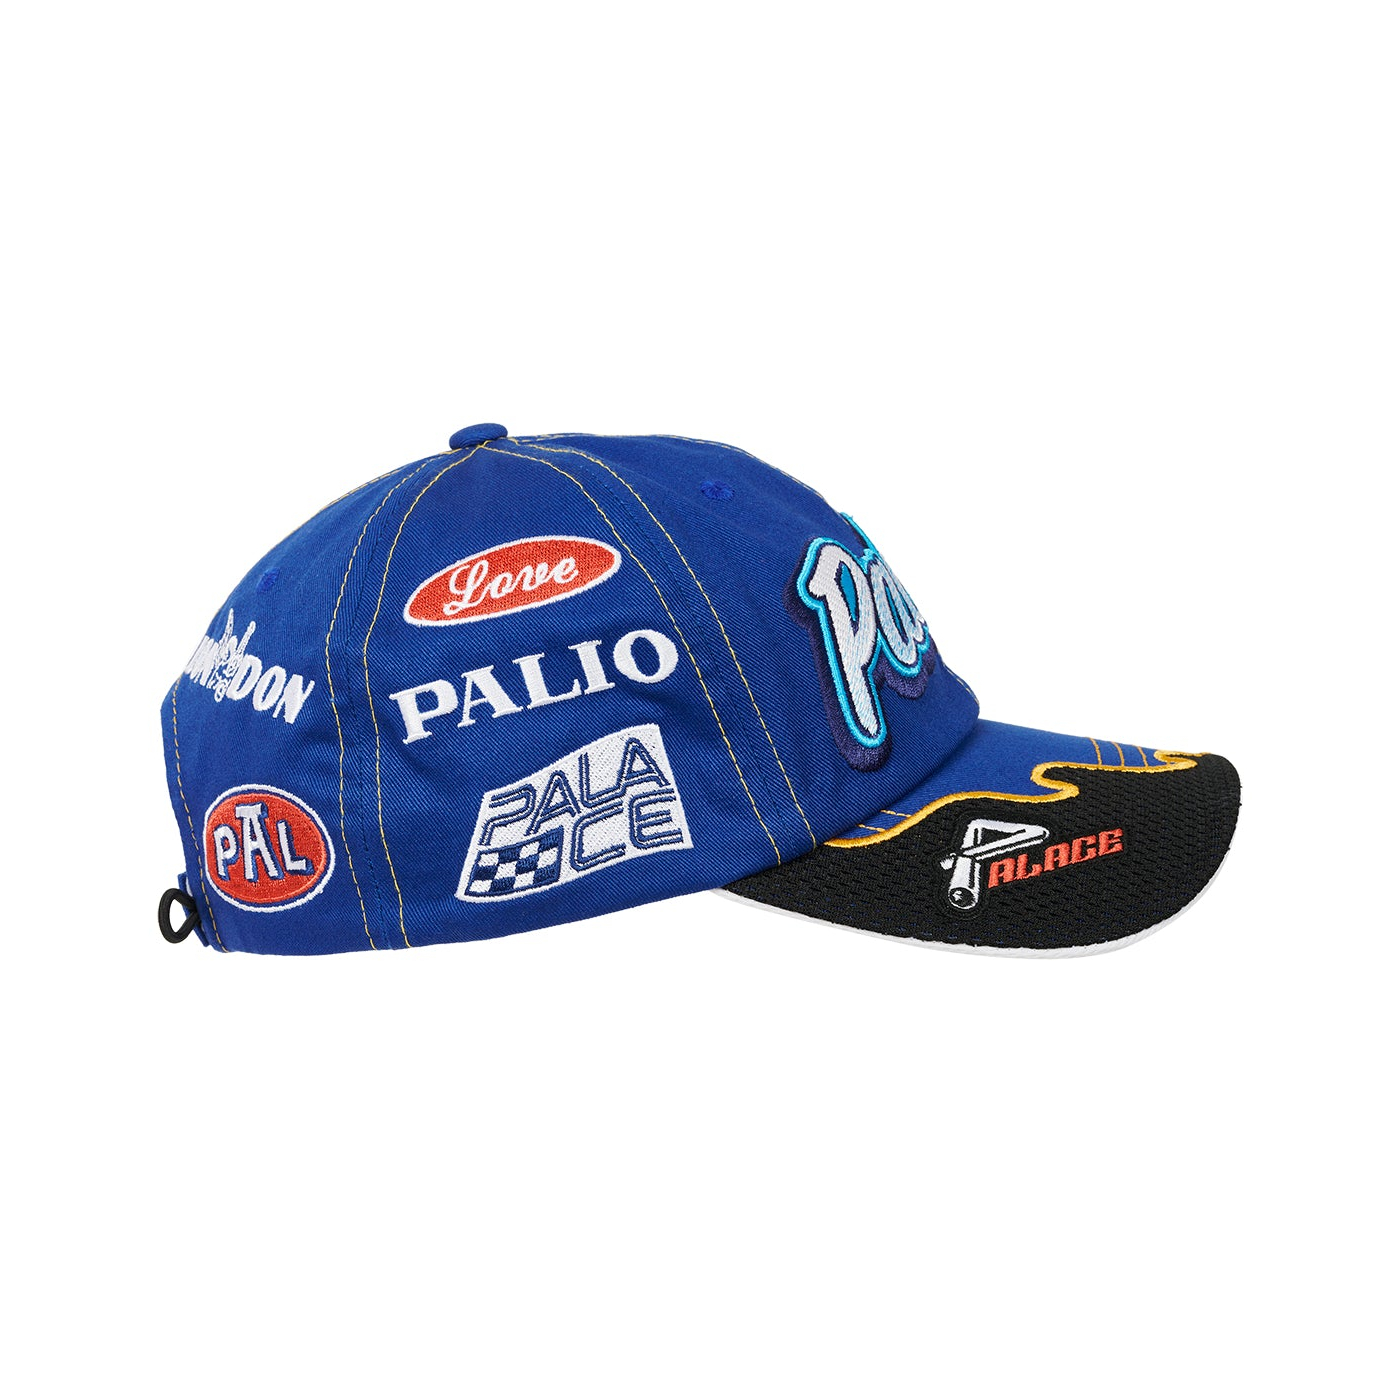 Thumbnail PALACE TEAM RACING 6-PANEL BLUE one color